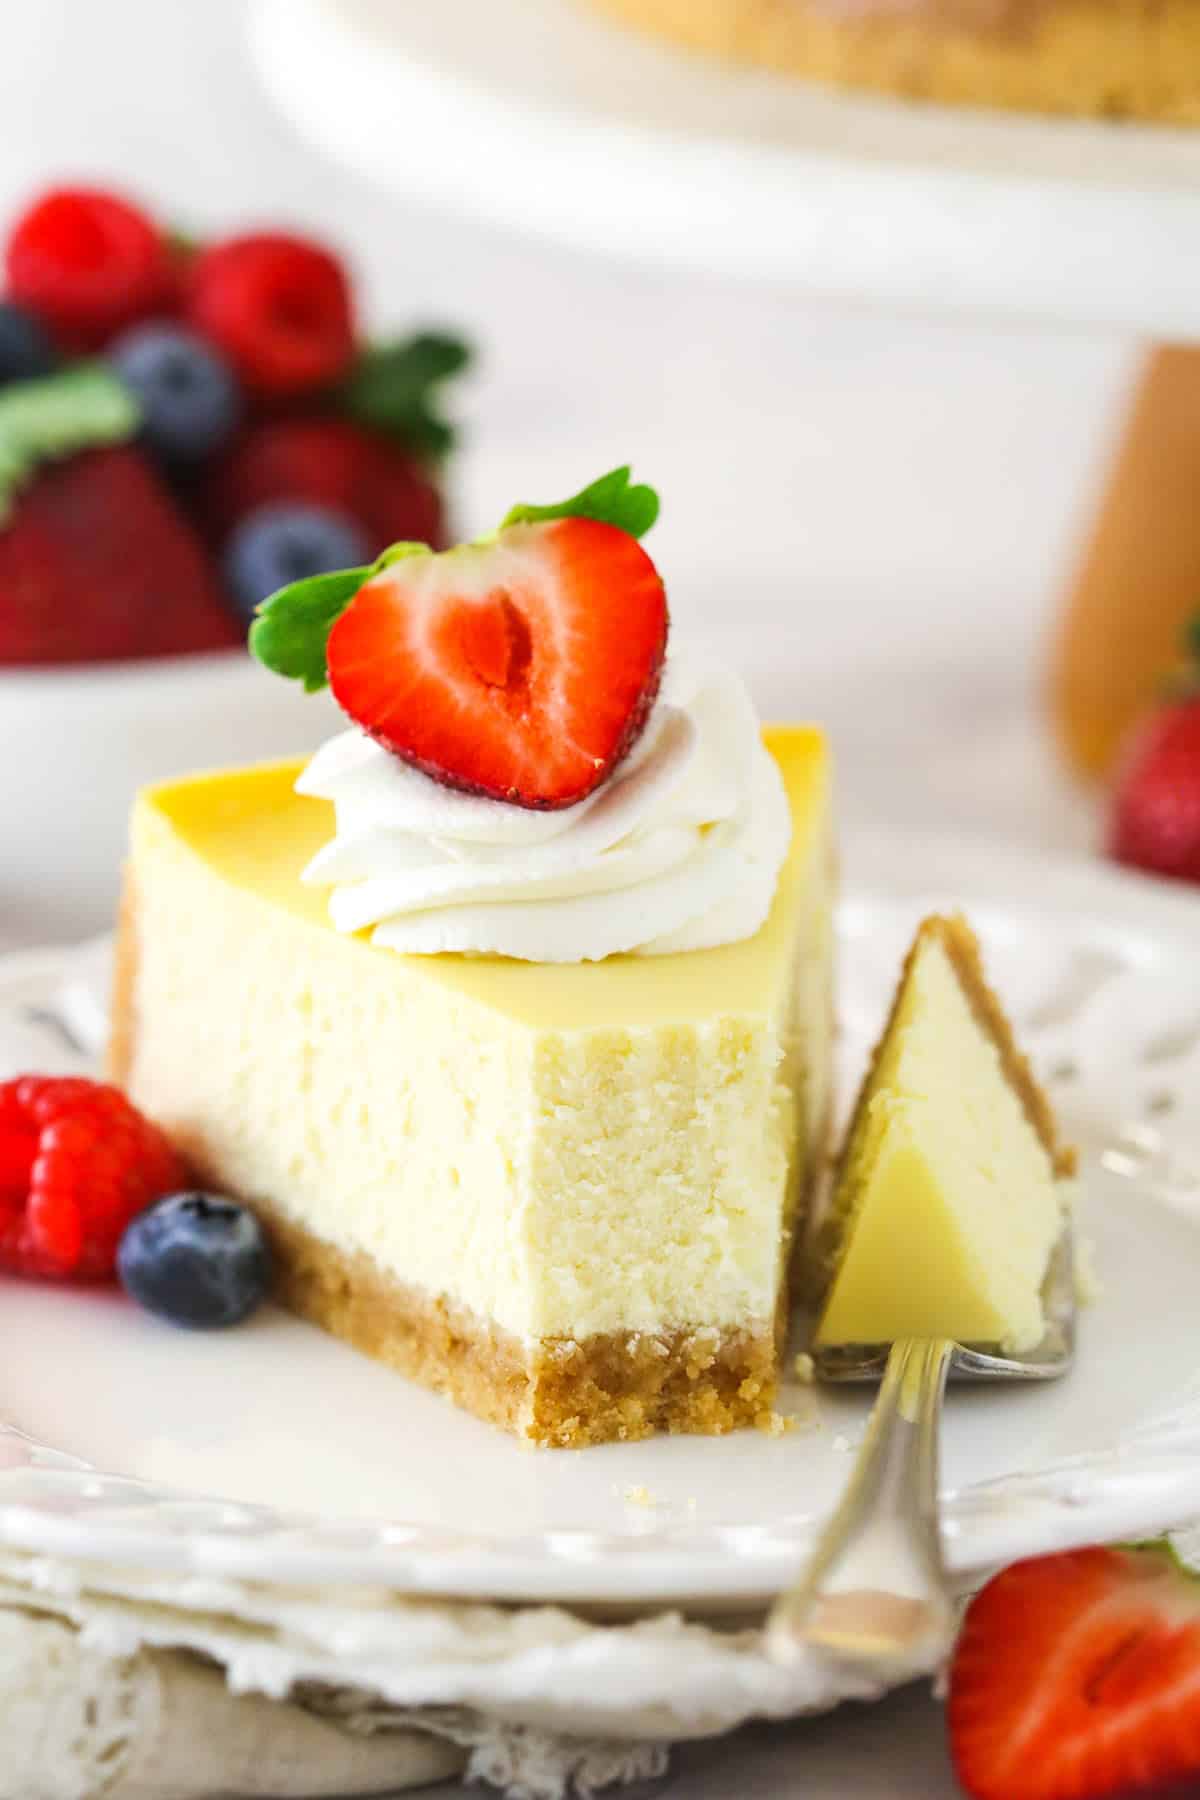 A slice of homemade cheesecake with whipped cream and berries with a bite taken